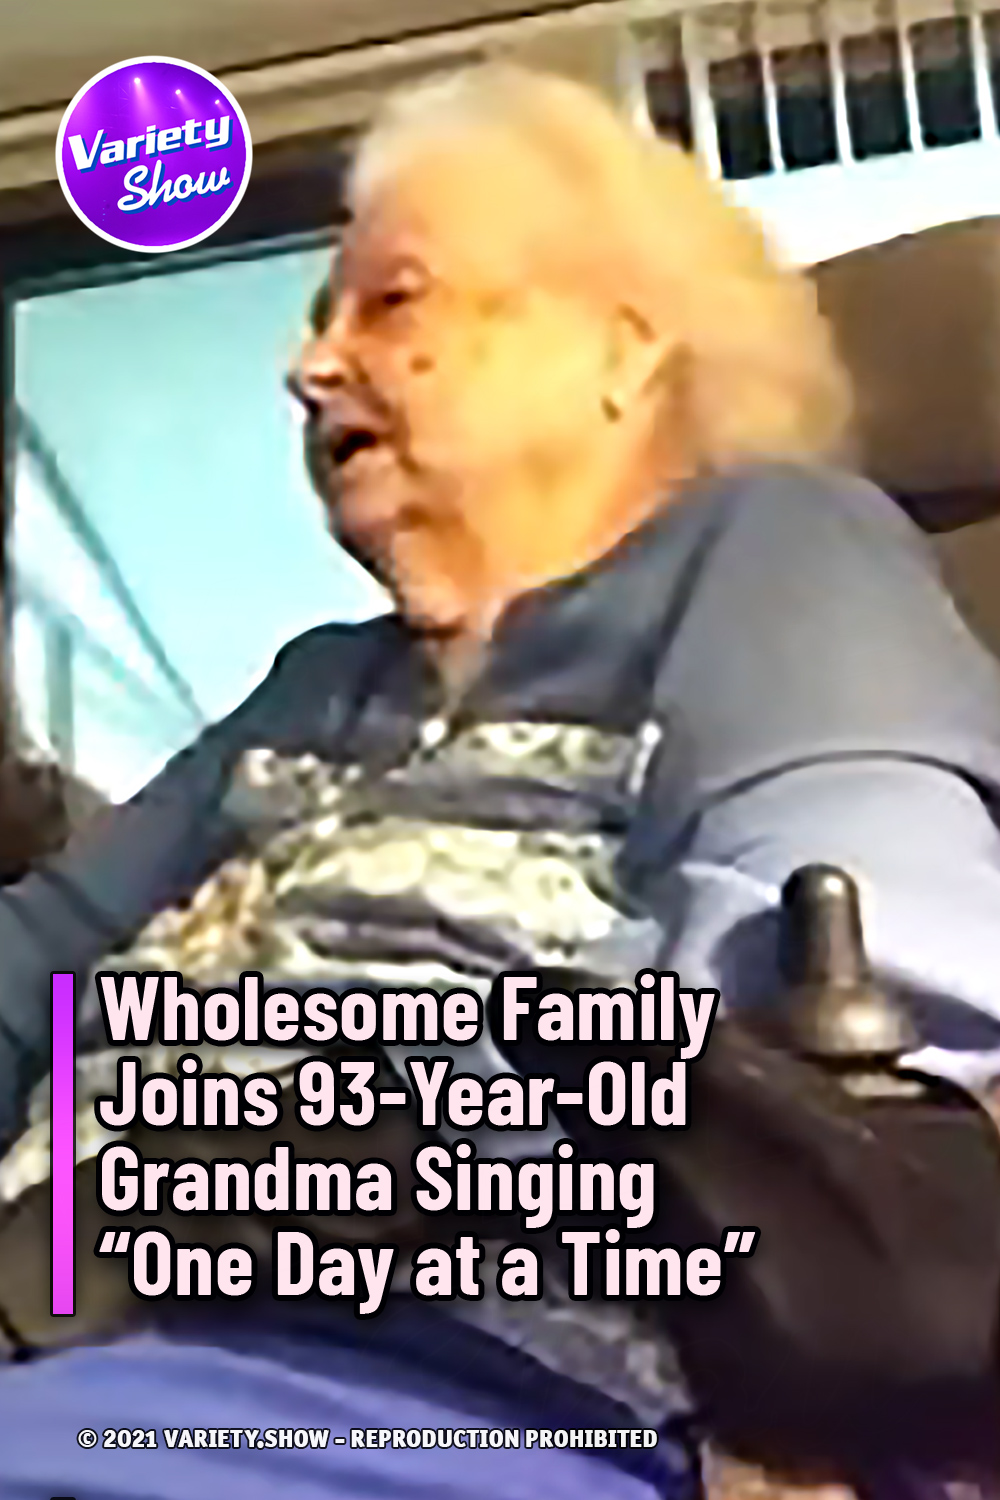 Wholesome Family Joins 93-Year-Old Grandma Singing “One Day at a Time”